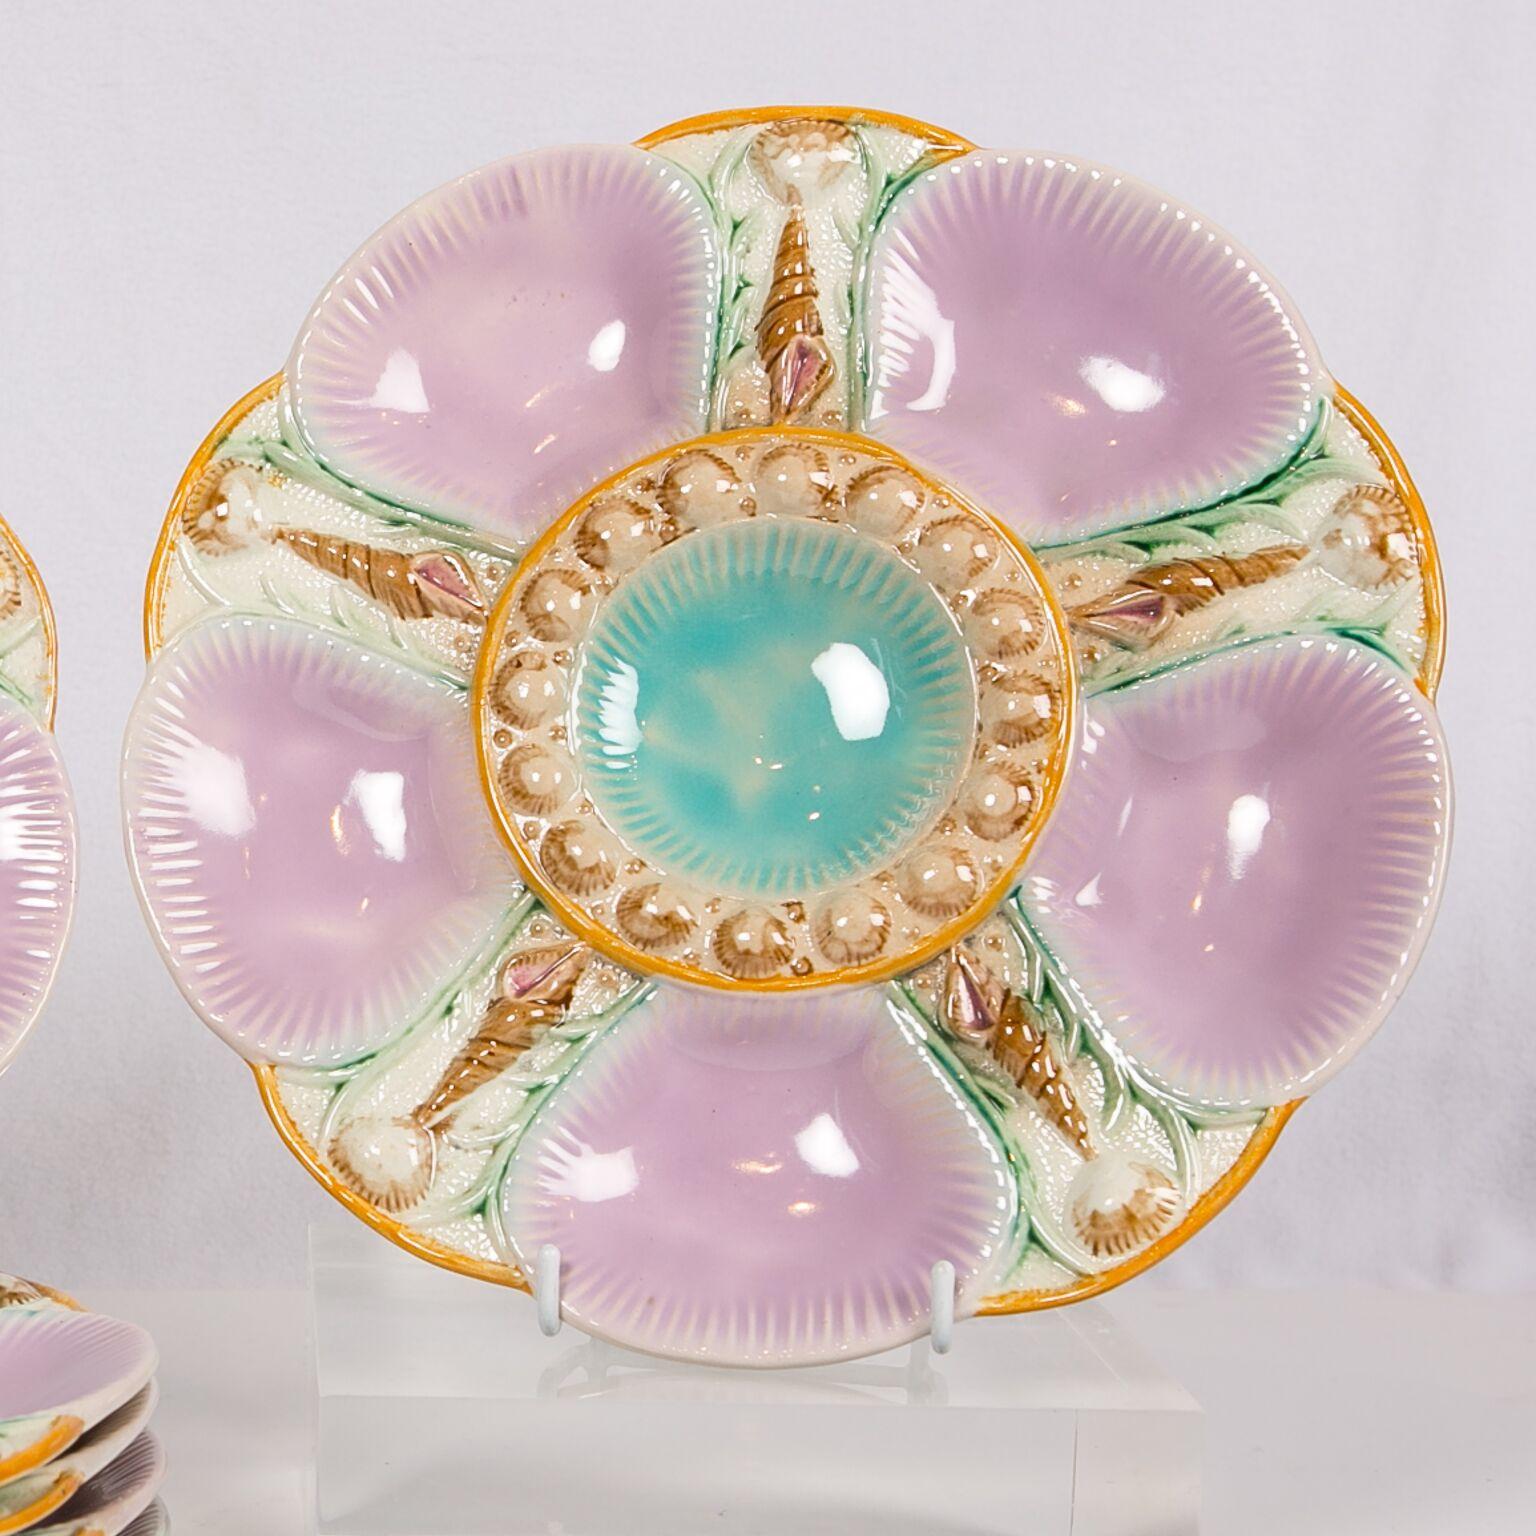 A set of six majolica oyster plates with shells between each purple/pink oyster cup and surrounding the turquoise center cup. Made in England circa 1880 they measure 9.75